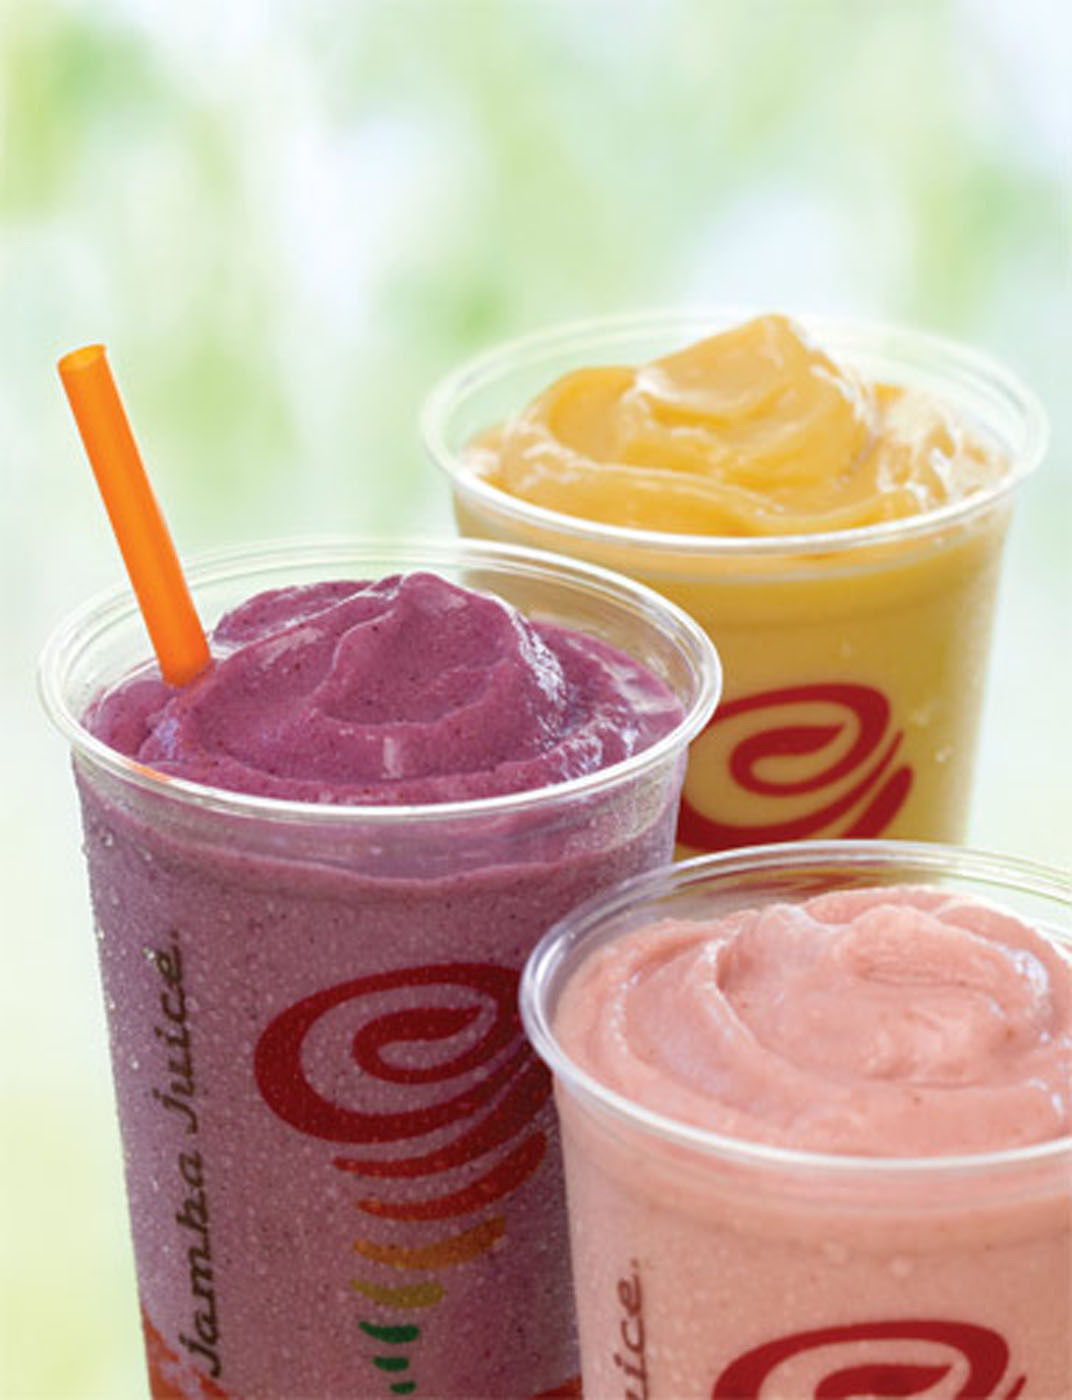 Jamba Juice Smoothies
 Get a Jamba Juice smoothie for $1 this week only